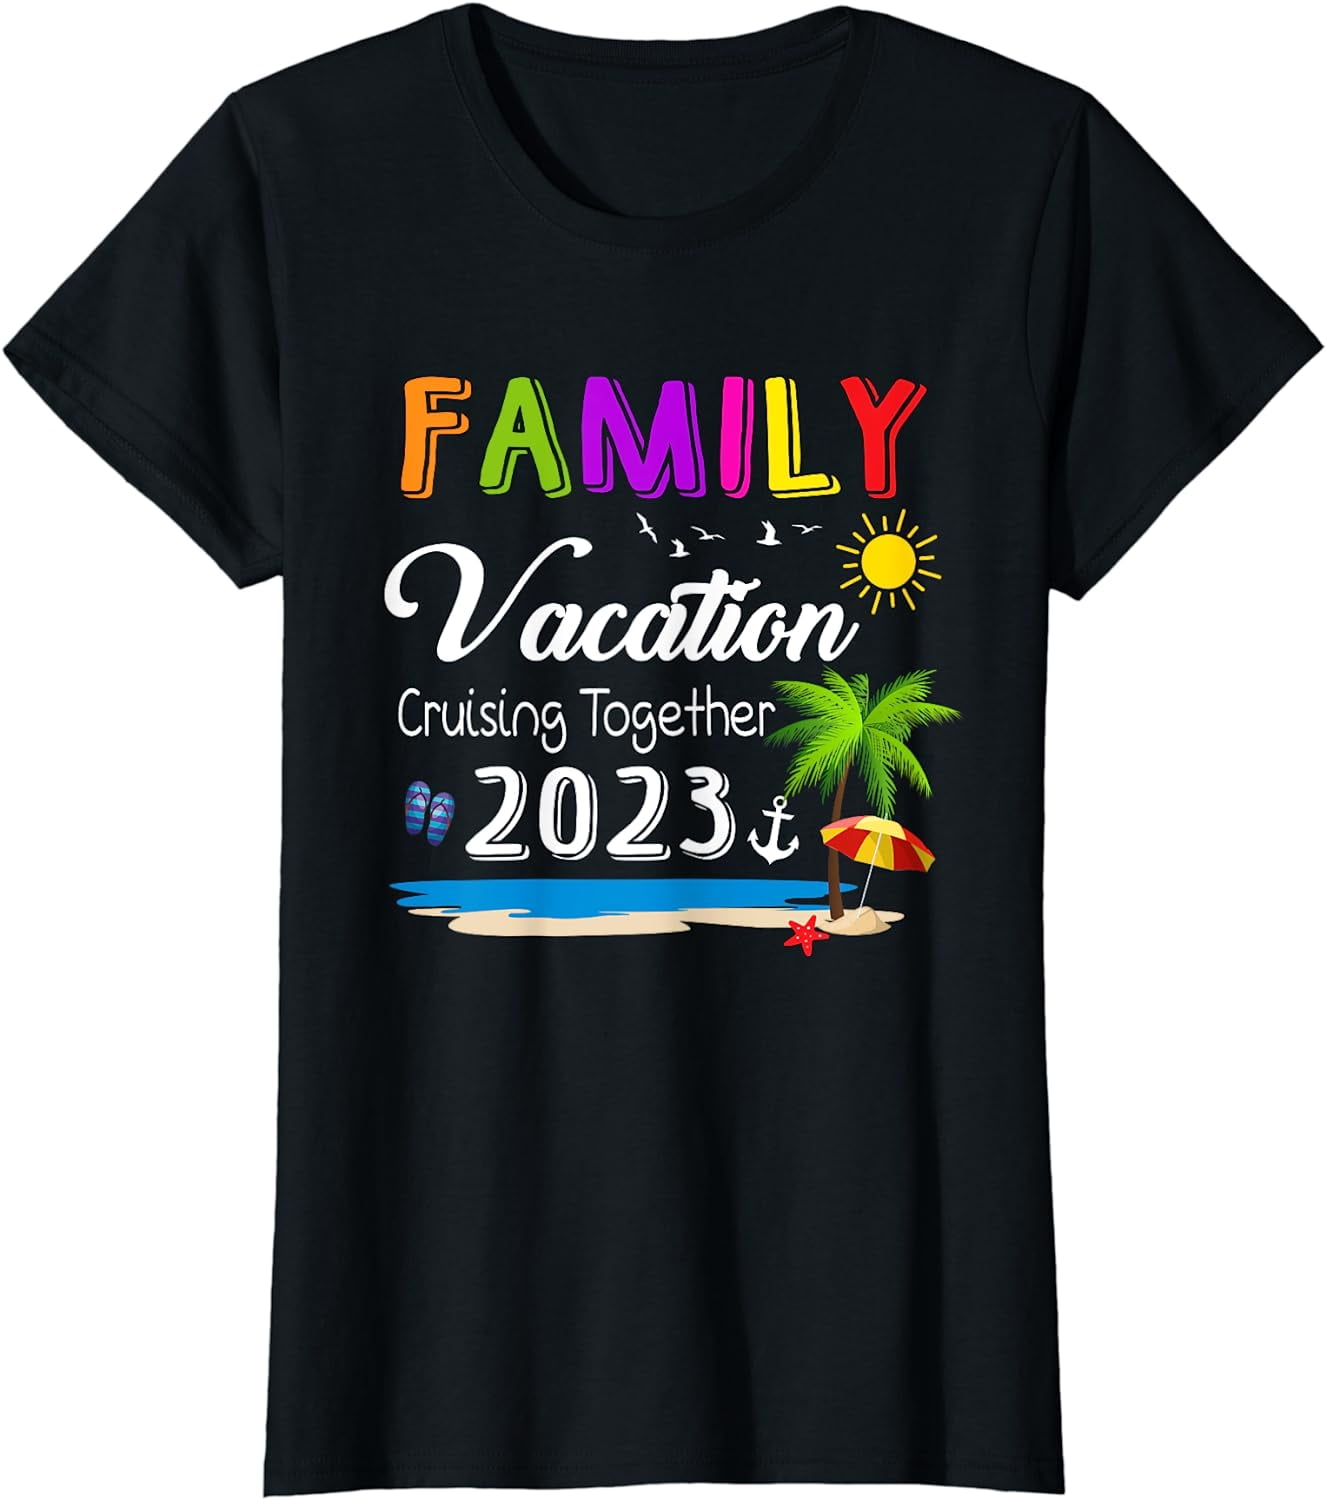 Family Vacation 2023 Cruising Together Matching Cruise Trip T-Shirt ...